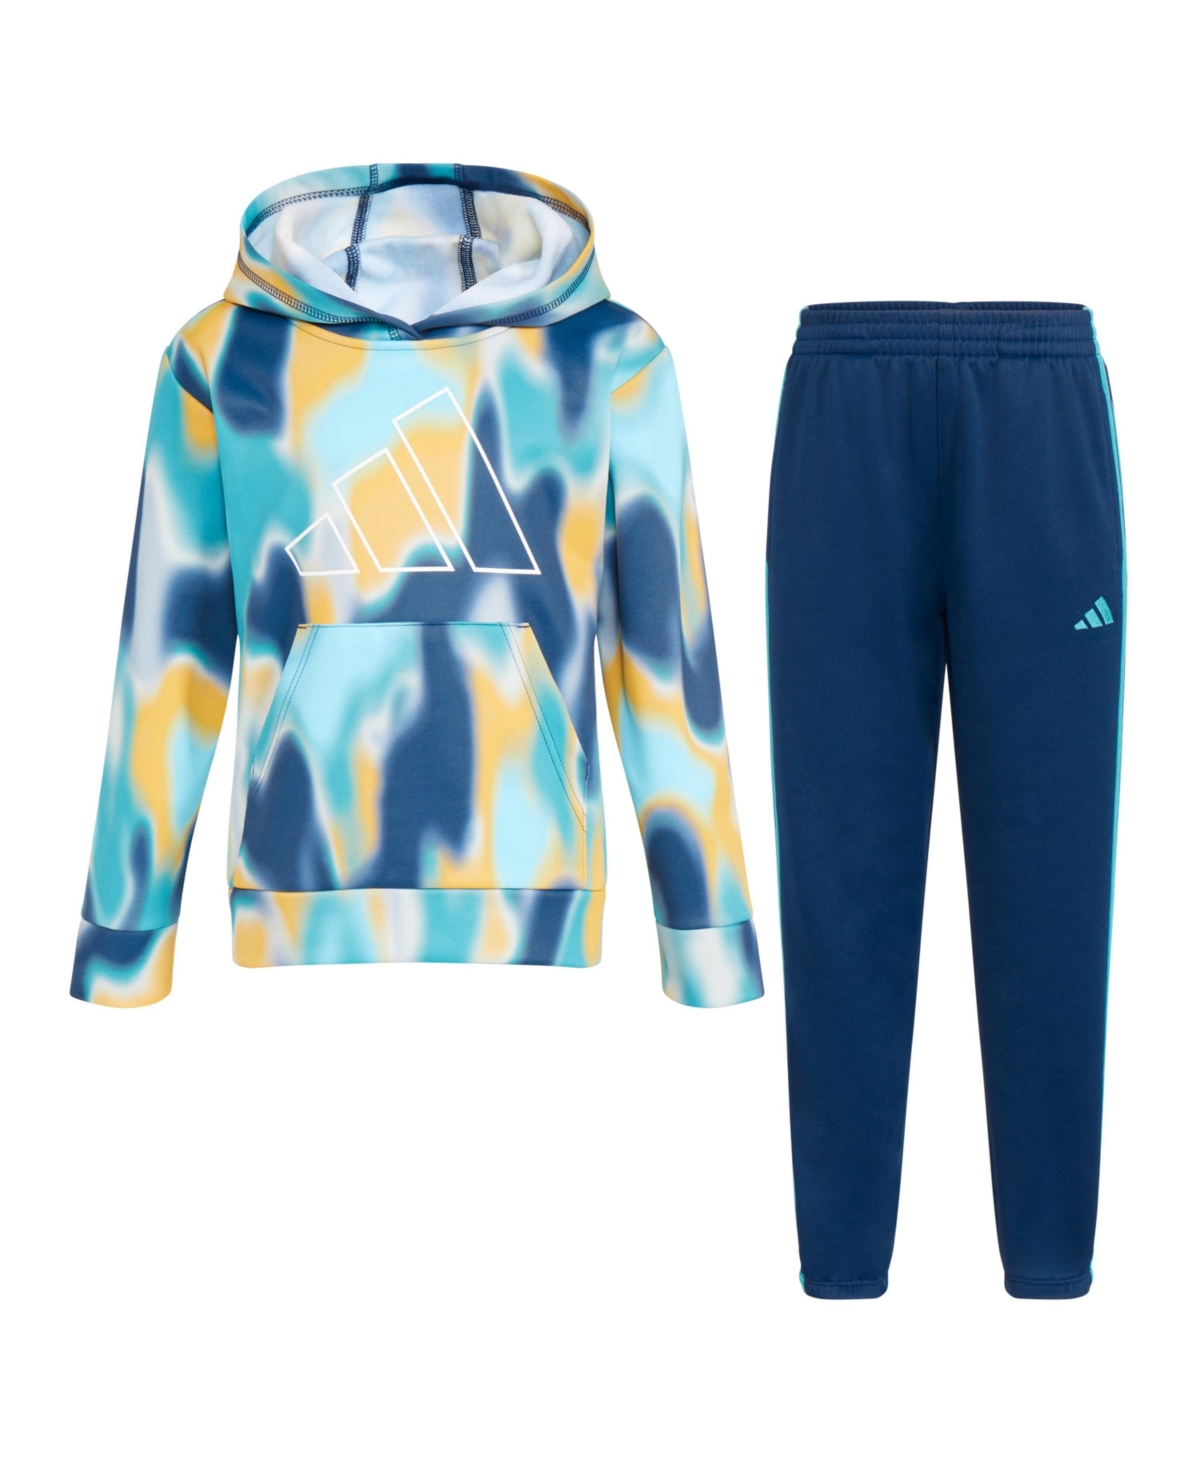 Shop Adidas Originals Little Boys Printed Polyester Fleece Pullover Hoodie And Jogger Pants, 2 Piece Set In Collegiate Navy With Pulse Aqua